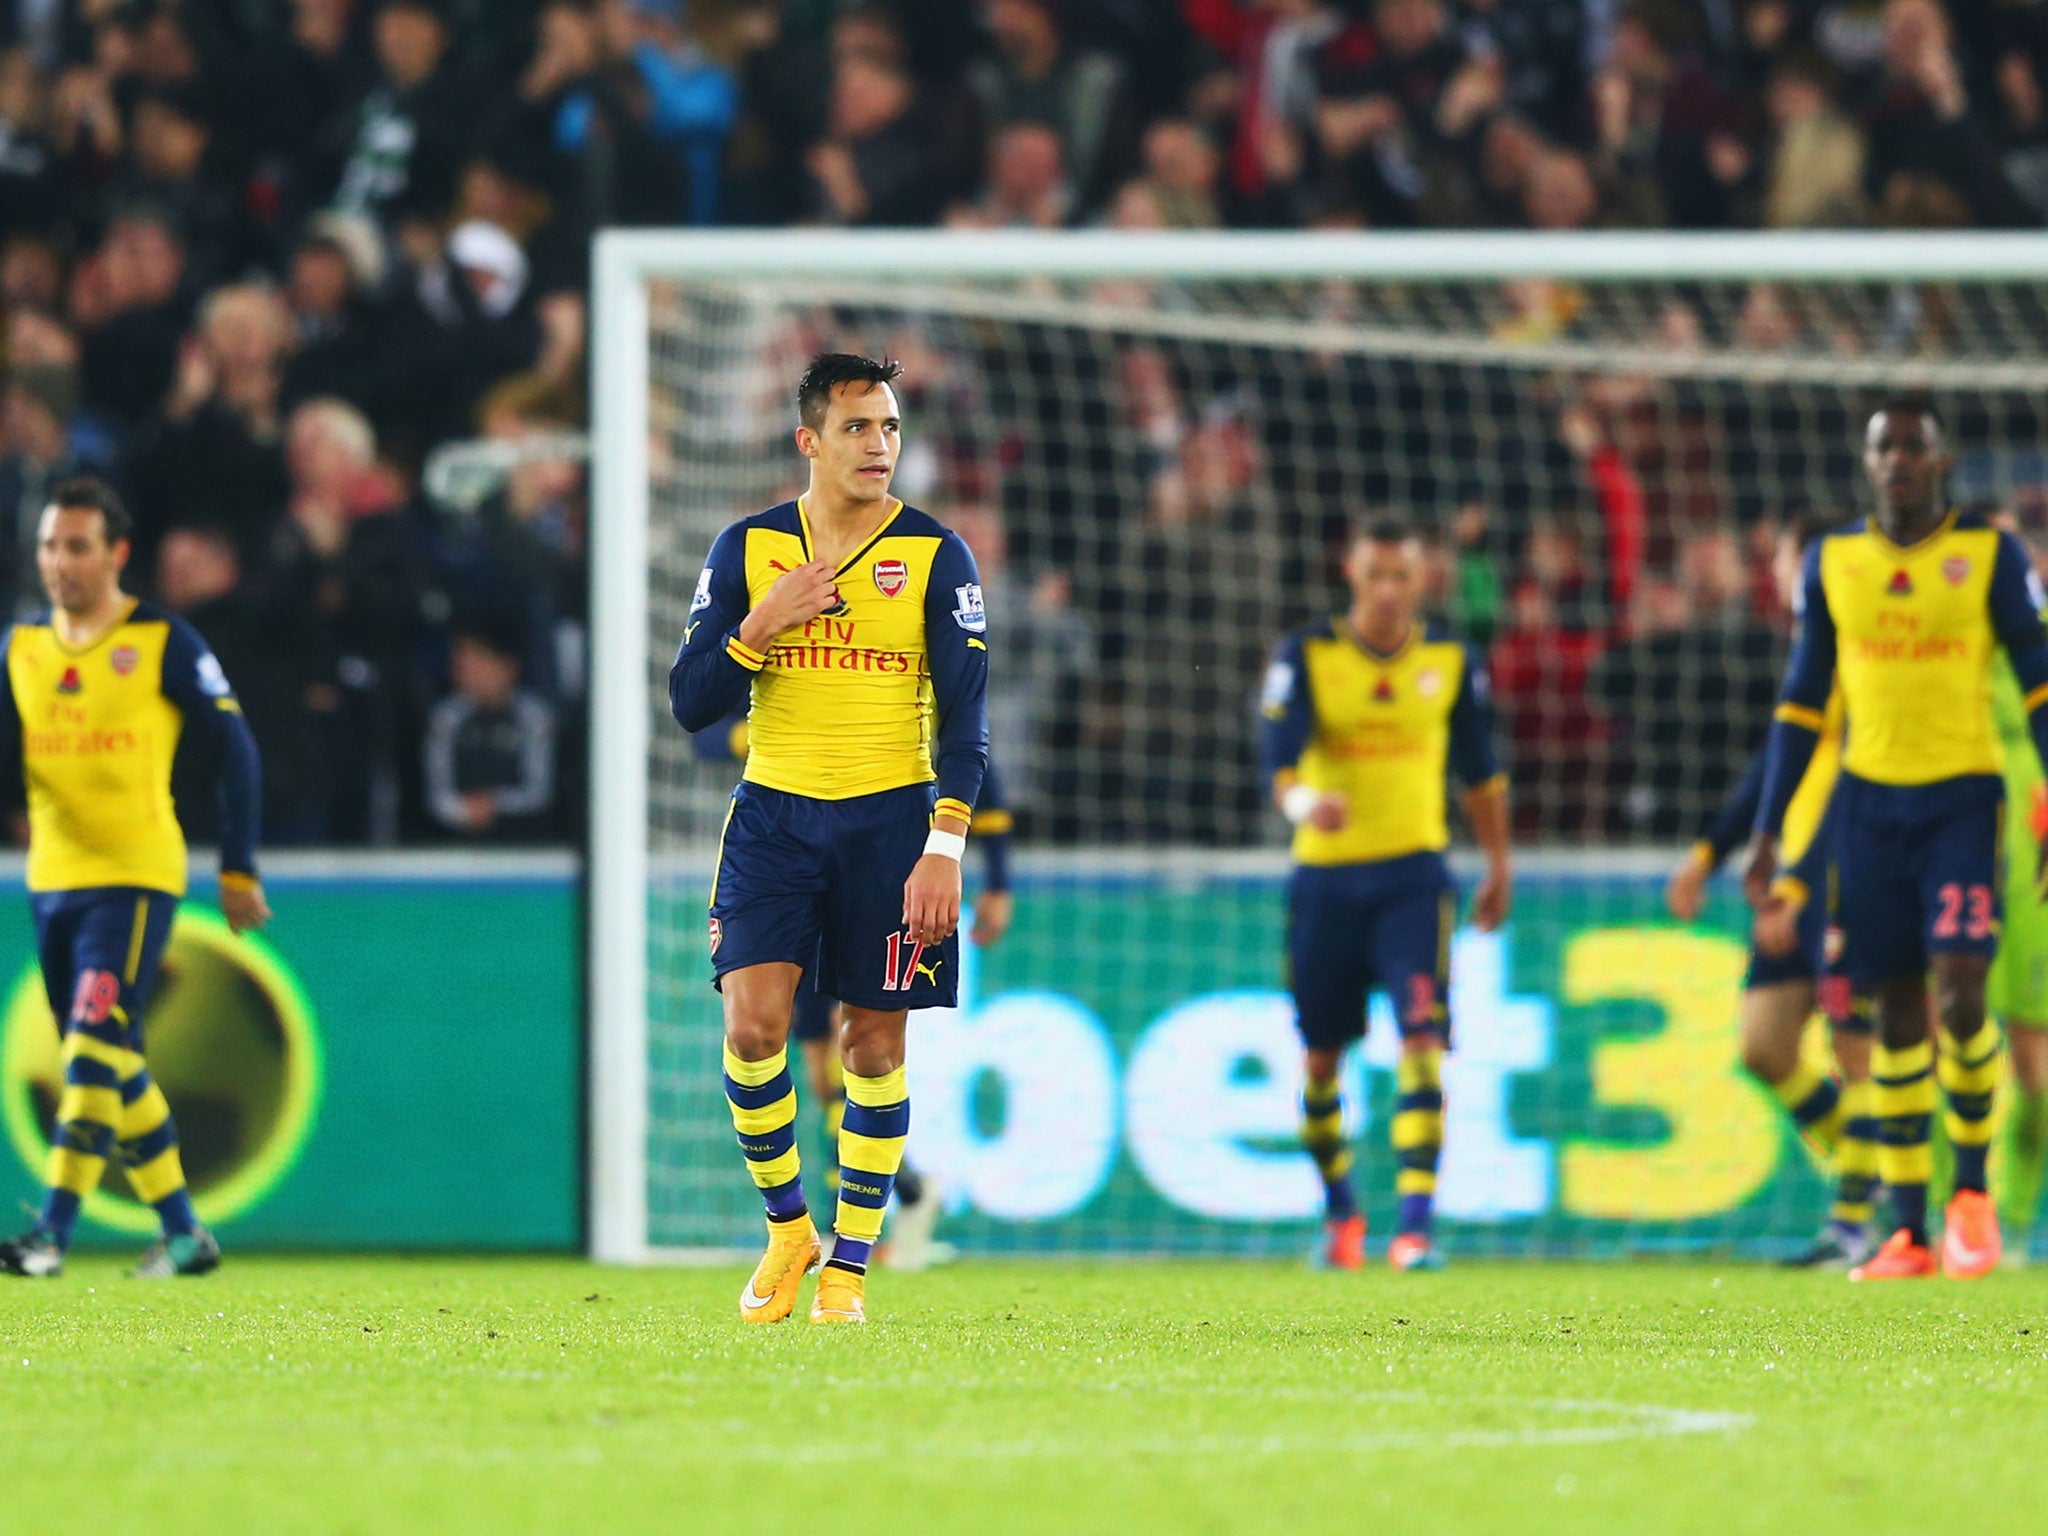 Alexis Sanchez of Arsenal (17) and team mates look dejected as they concede a goal during the Barclays Premier League match between Swansea City and Arsenal at Liberty Stadium on November 9, 2014 in Swansea, Wales.